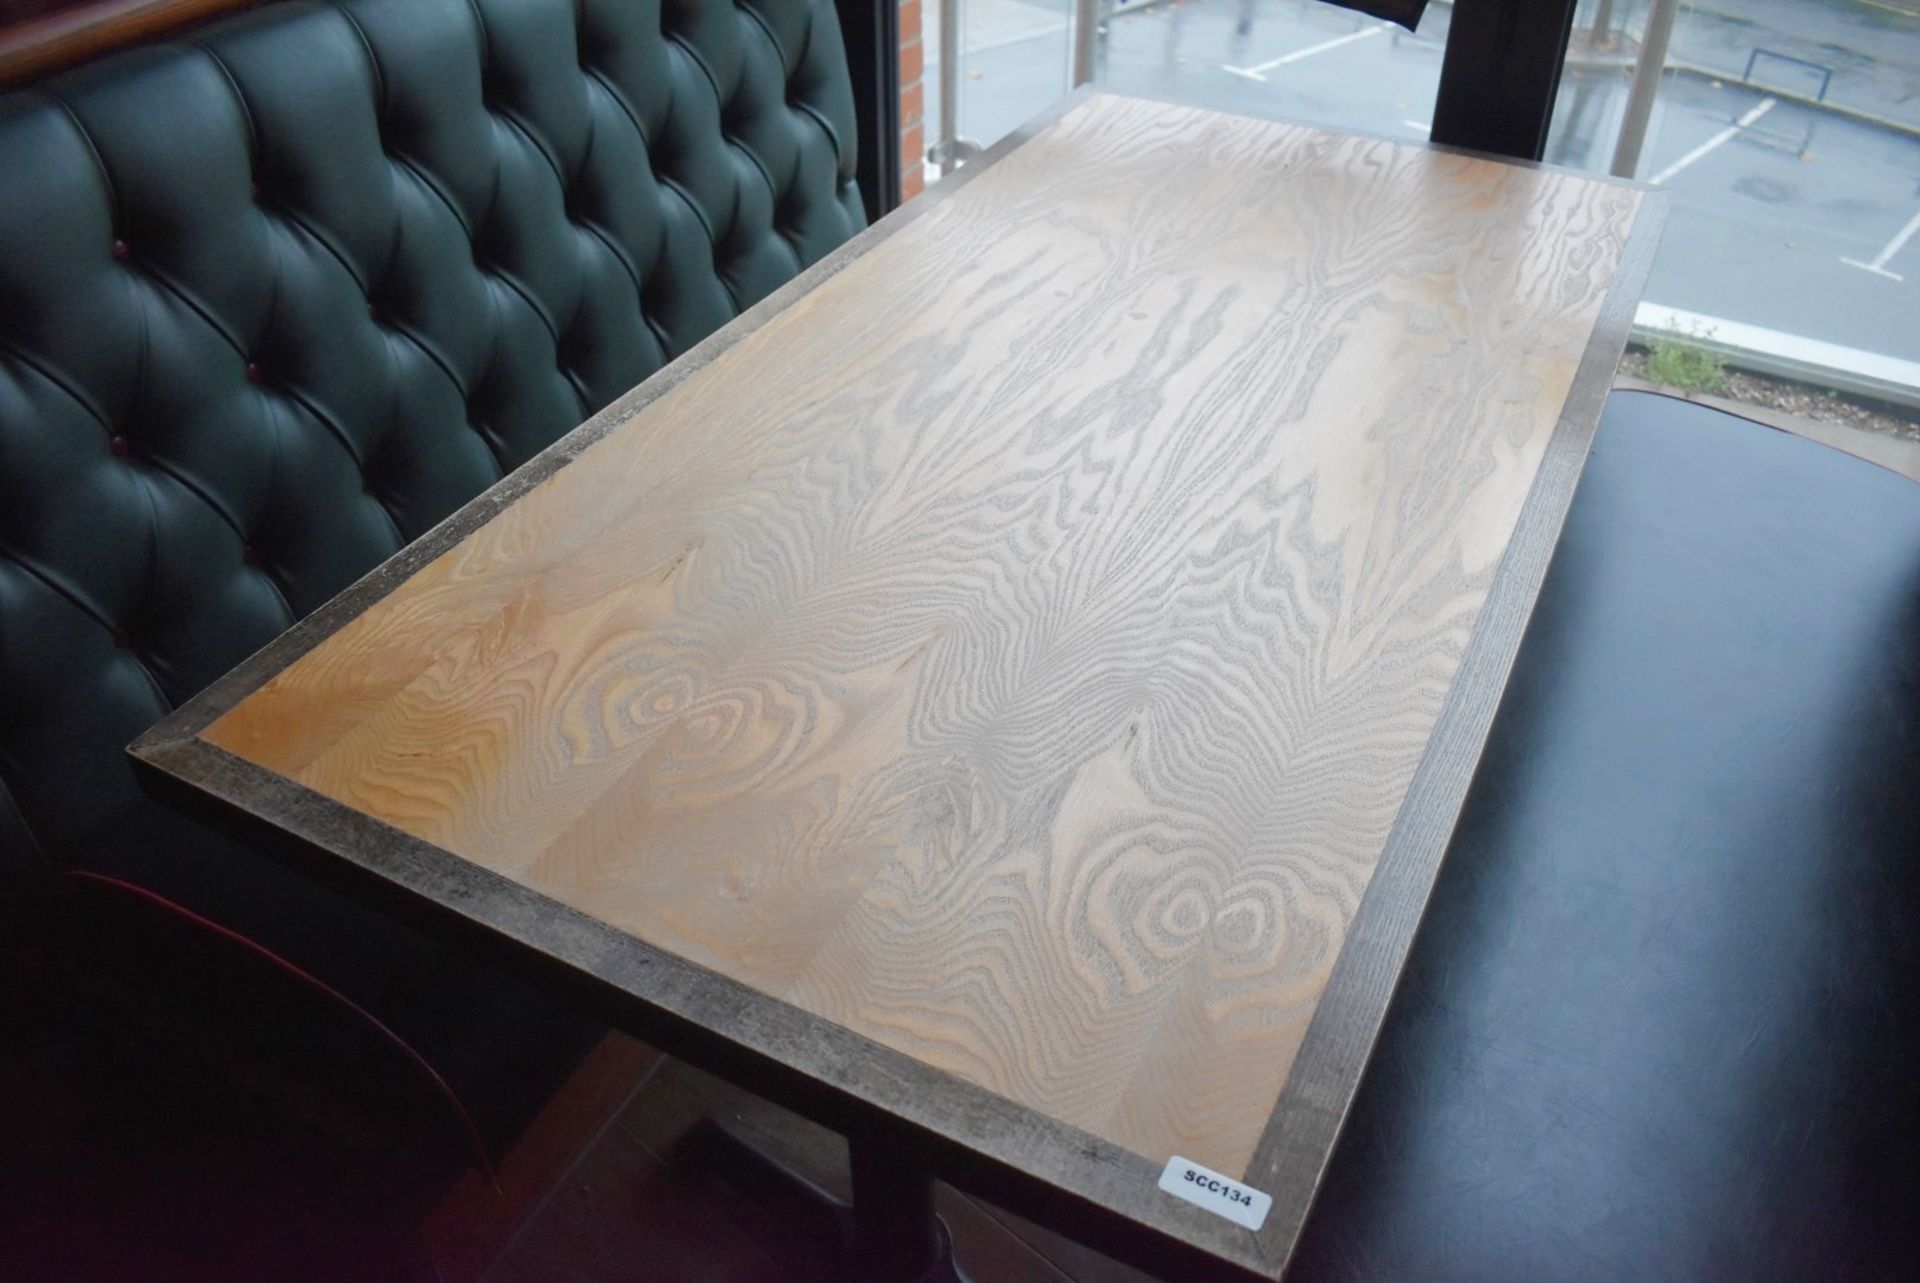 1 x Rectangular Restaurant Table - Seats Upto 4 Persons - Two Tone Wooden Top and Cast Iron Bases - Image 3 of 5